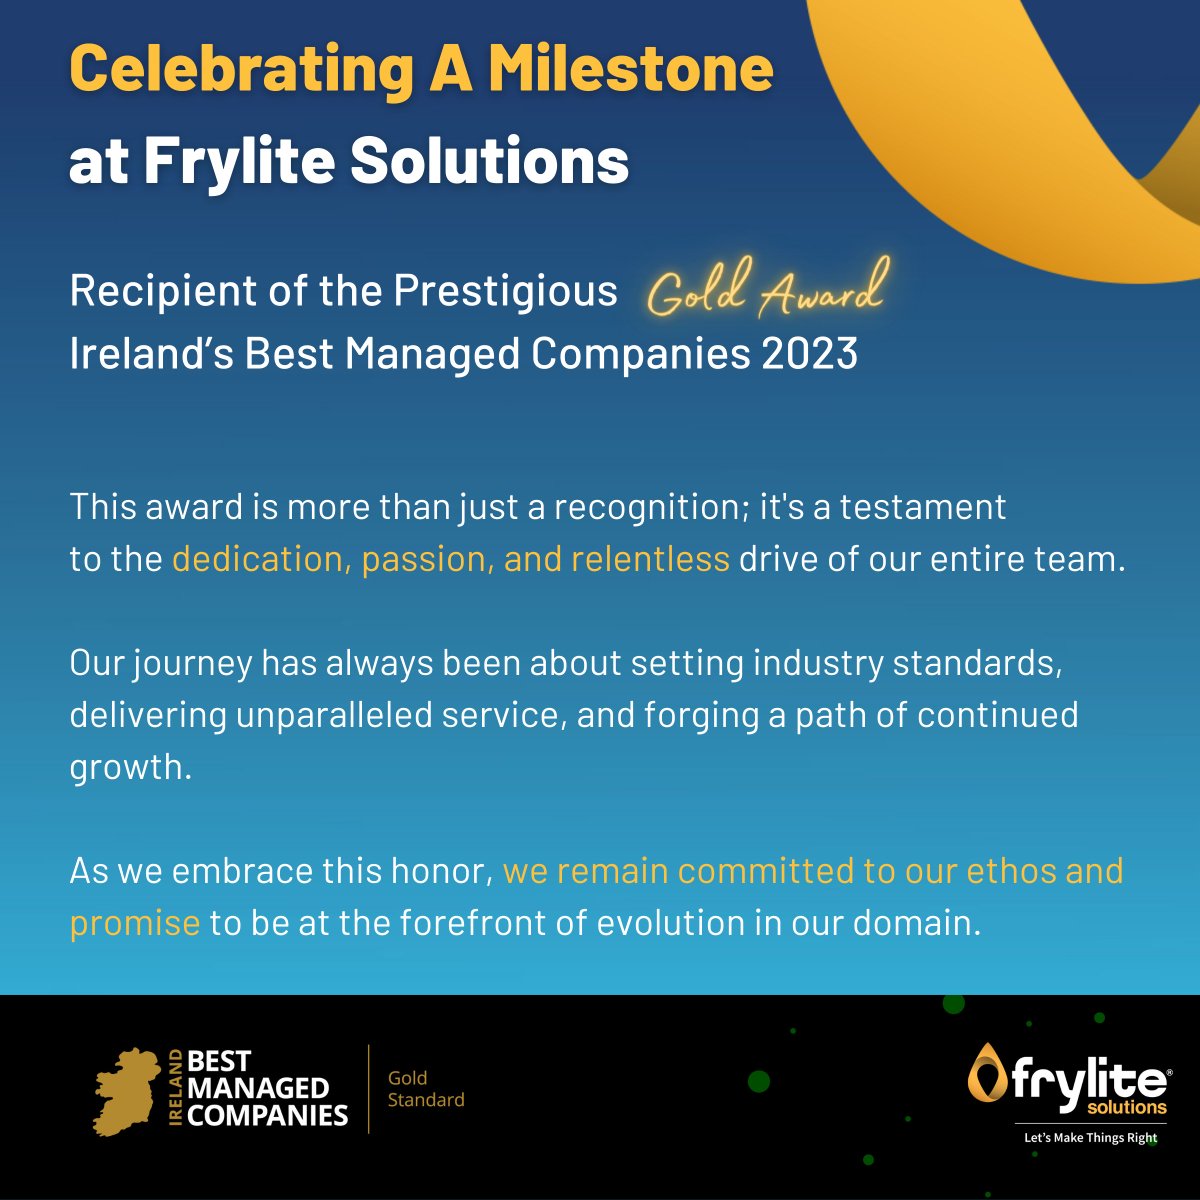 We're over the moon to share that Frylite Solutions has been distinguished as one of Ireland’s Best Managed Companies for 2023! And not just that, we’ve secured the Gold award - a symbol of unmatched dedication and innovation in the business world. #bestmanaged @DeloitteIreland